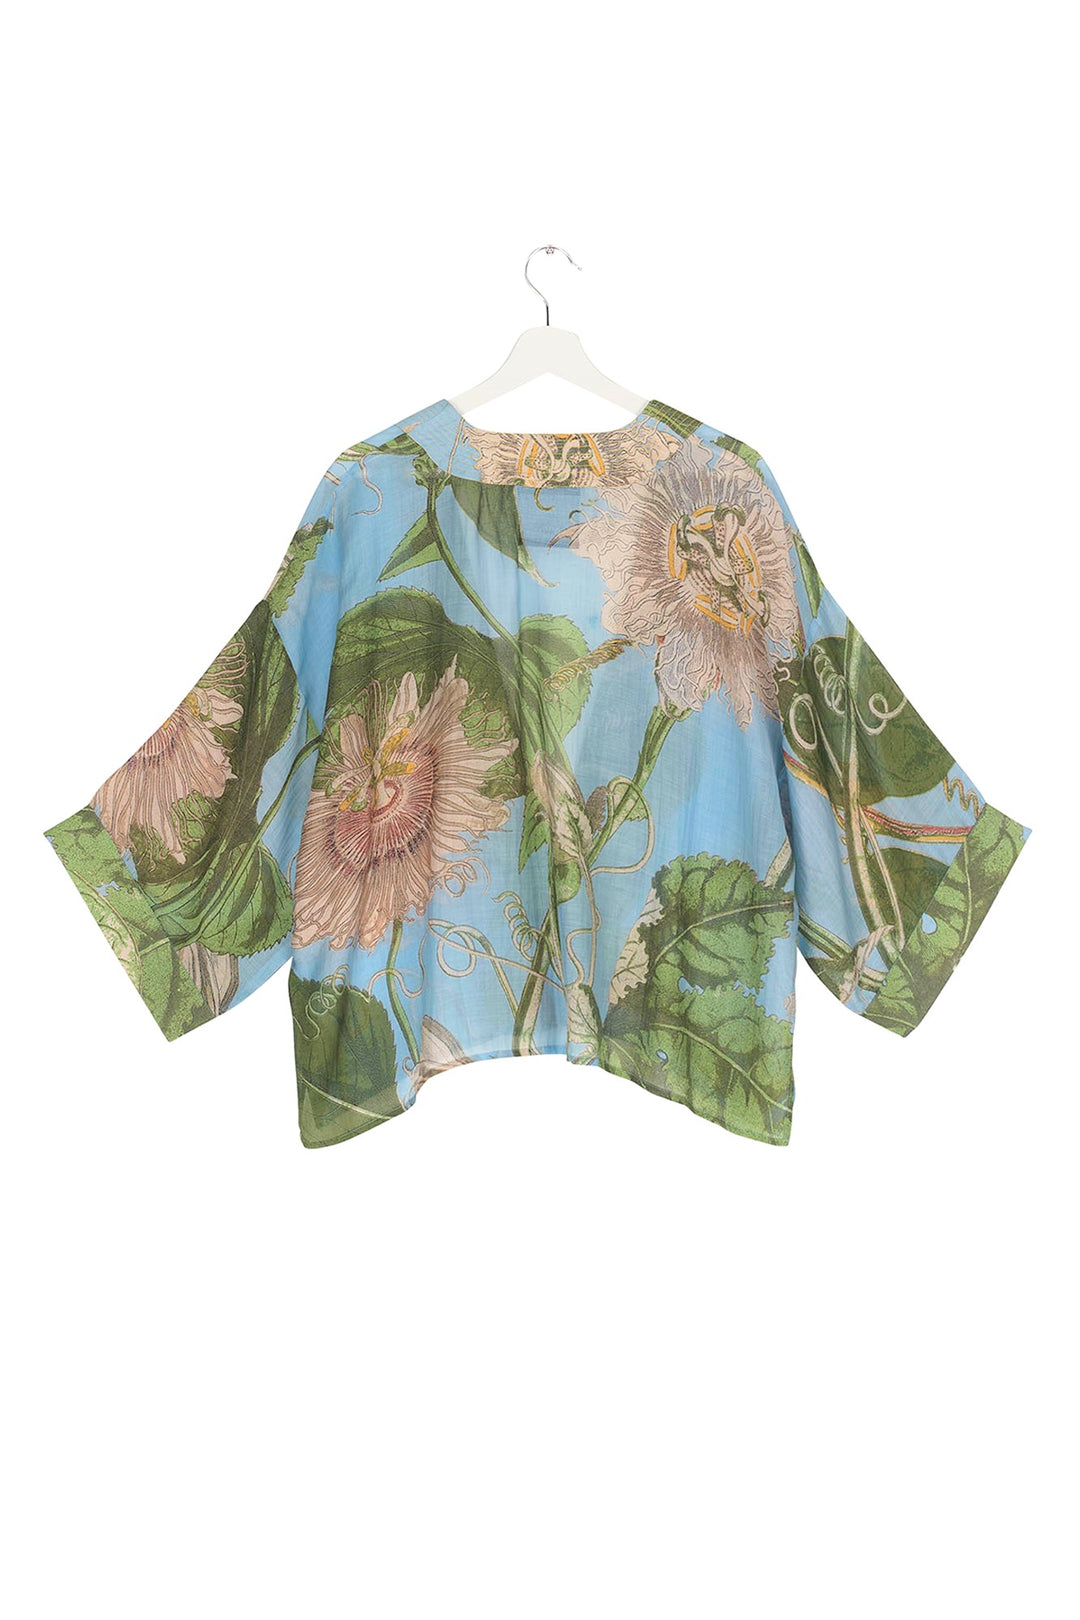 Passion Flower or 'Passiflora' mini kimono jacket sky blue by One Hundred Stars in Collaboration with Kew, Royal Botanic Gardens. 